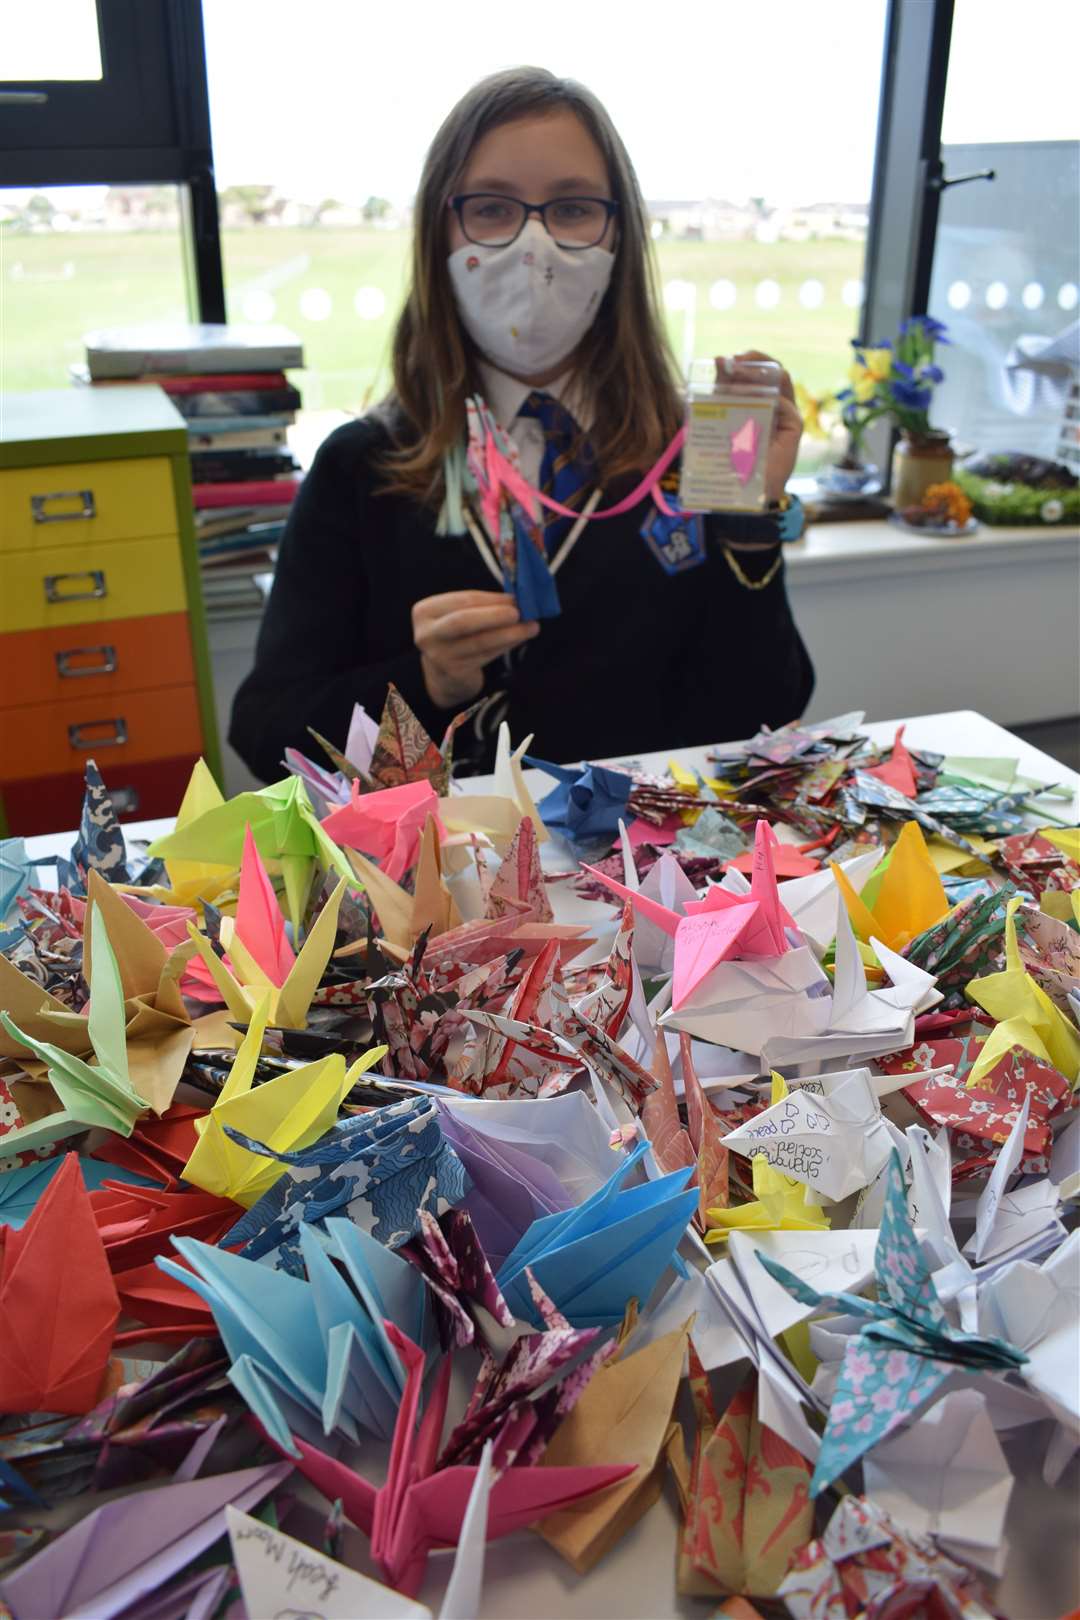 Lossiemouth High School pupil Ellie Rose Murray with some of the origami peace cranes.